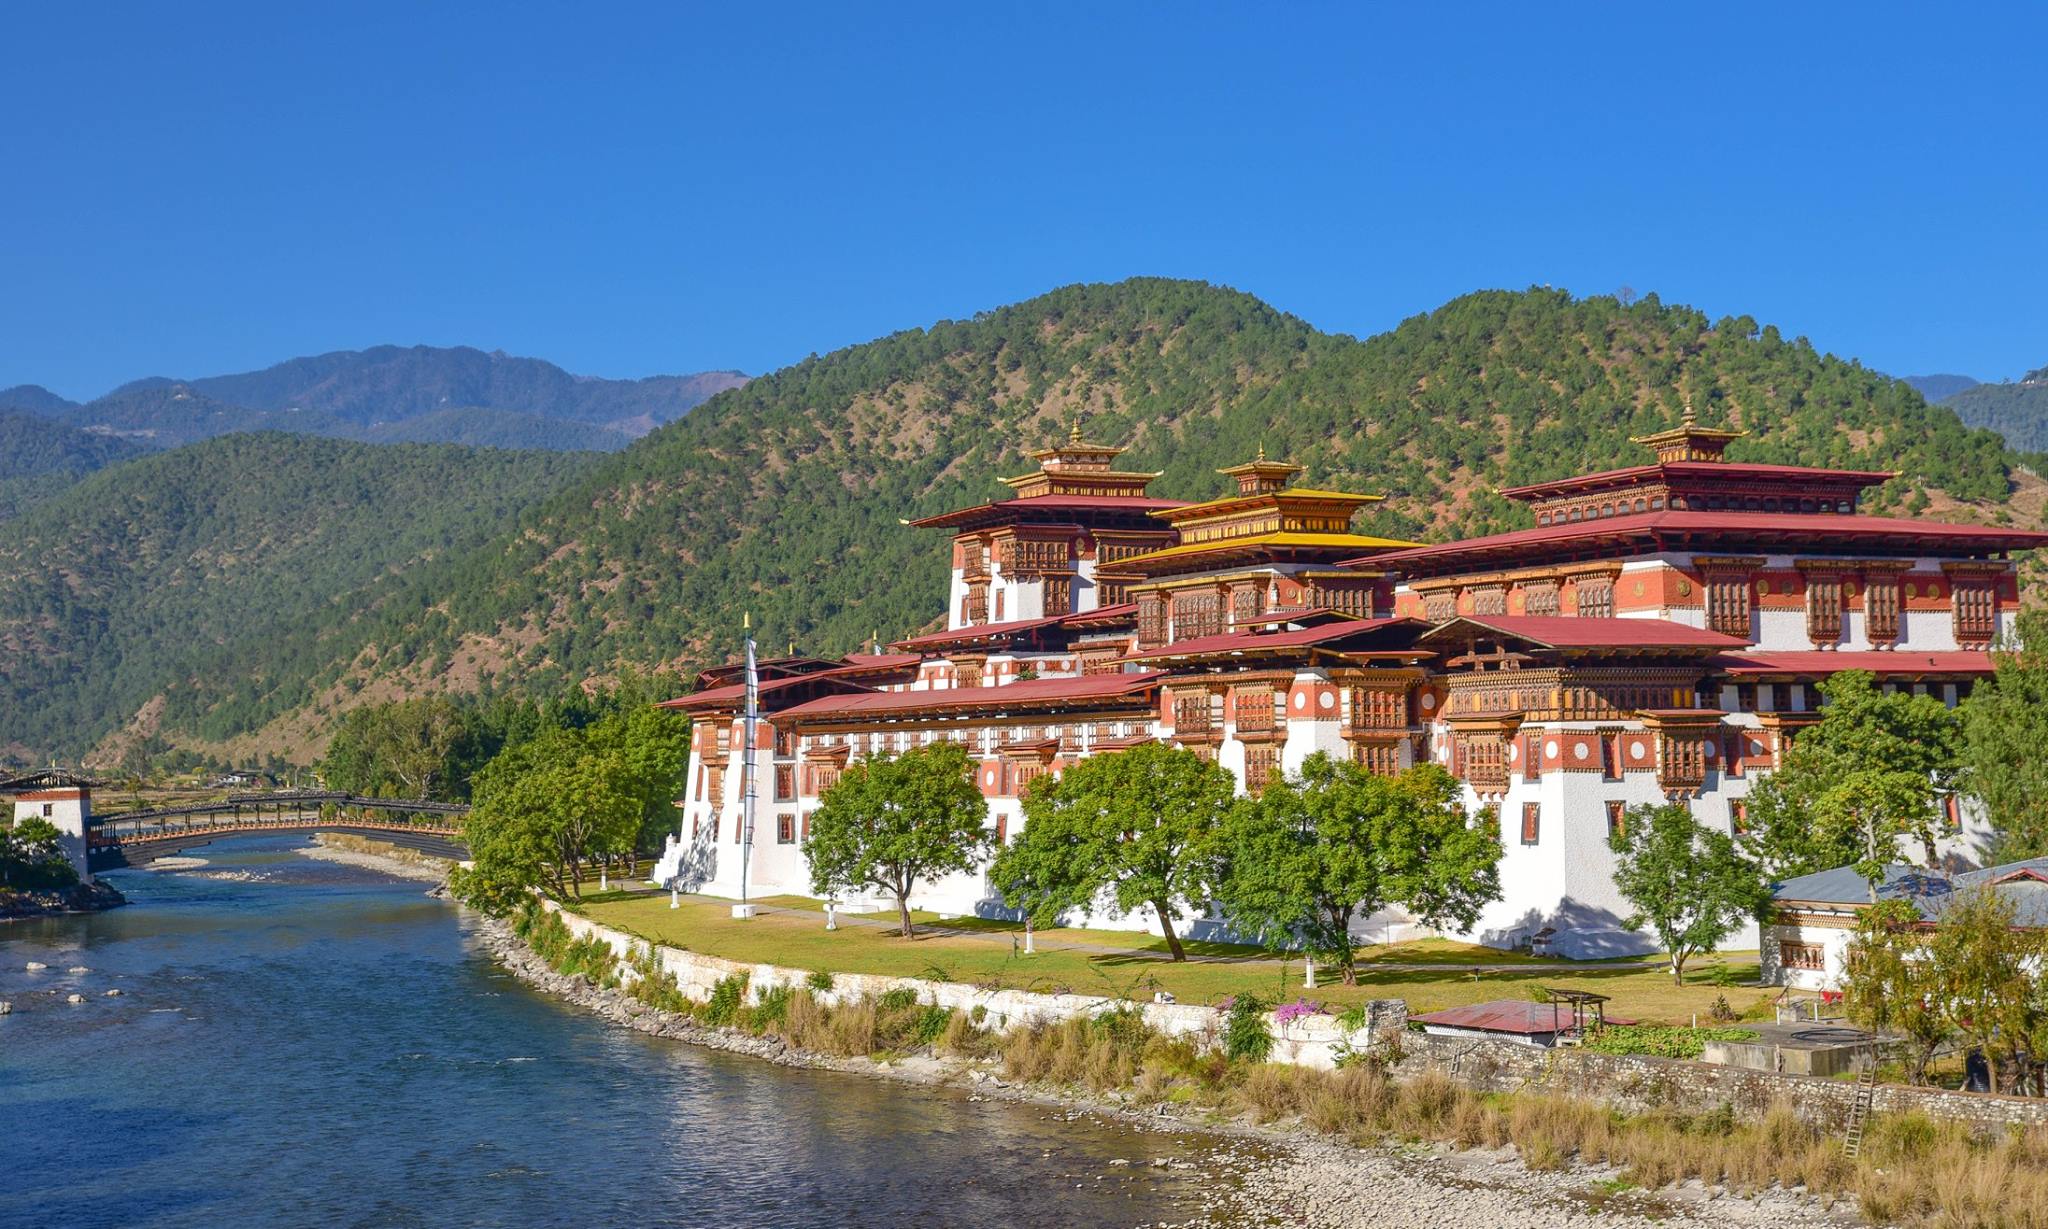 Nestled between two gigantic neighbors, the tiny kingdom of Bhutan is a majestic, serene, and breathtakingly beautiful hideaway high in the Himalayas. 